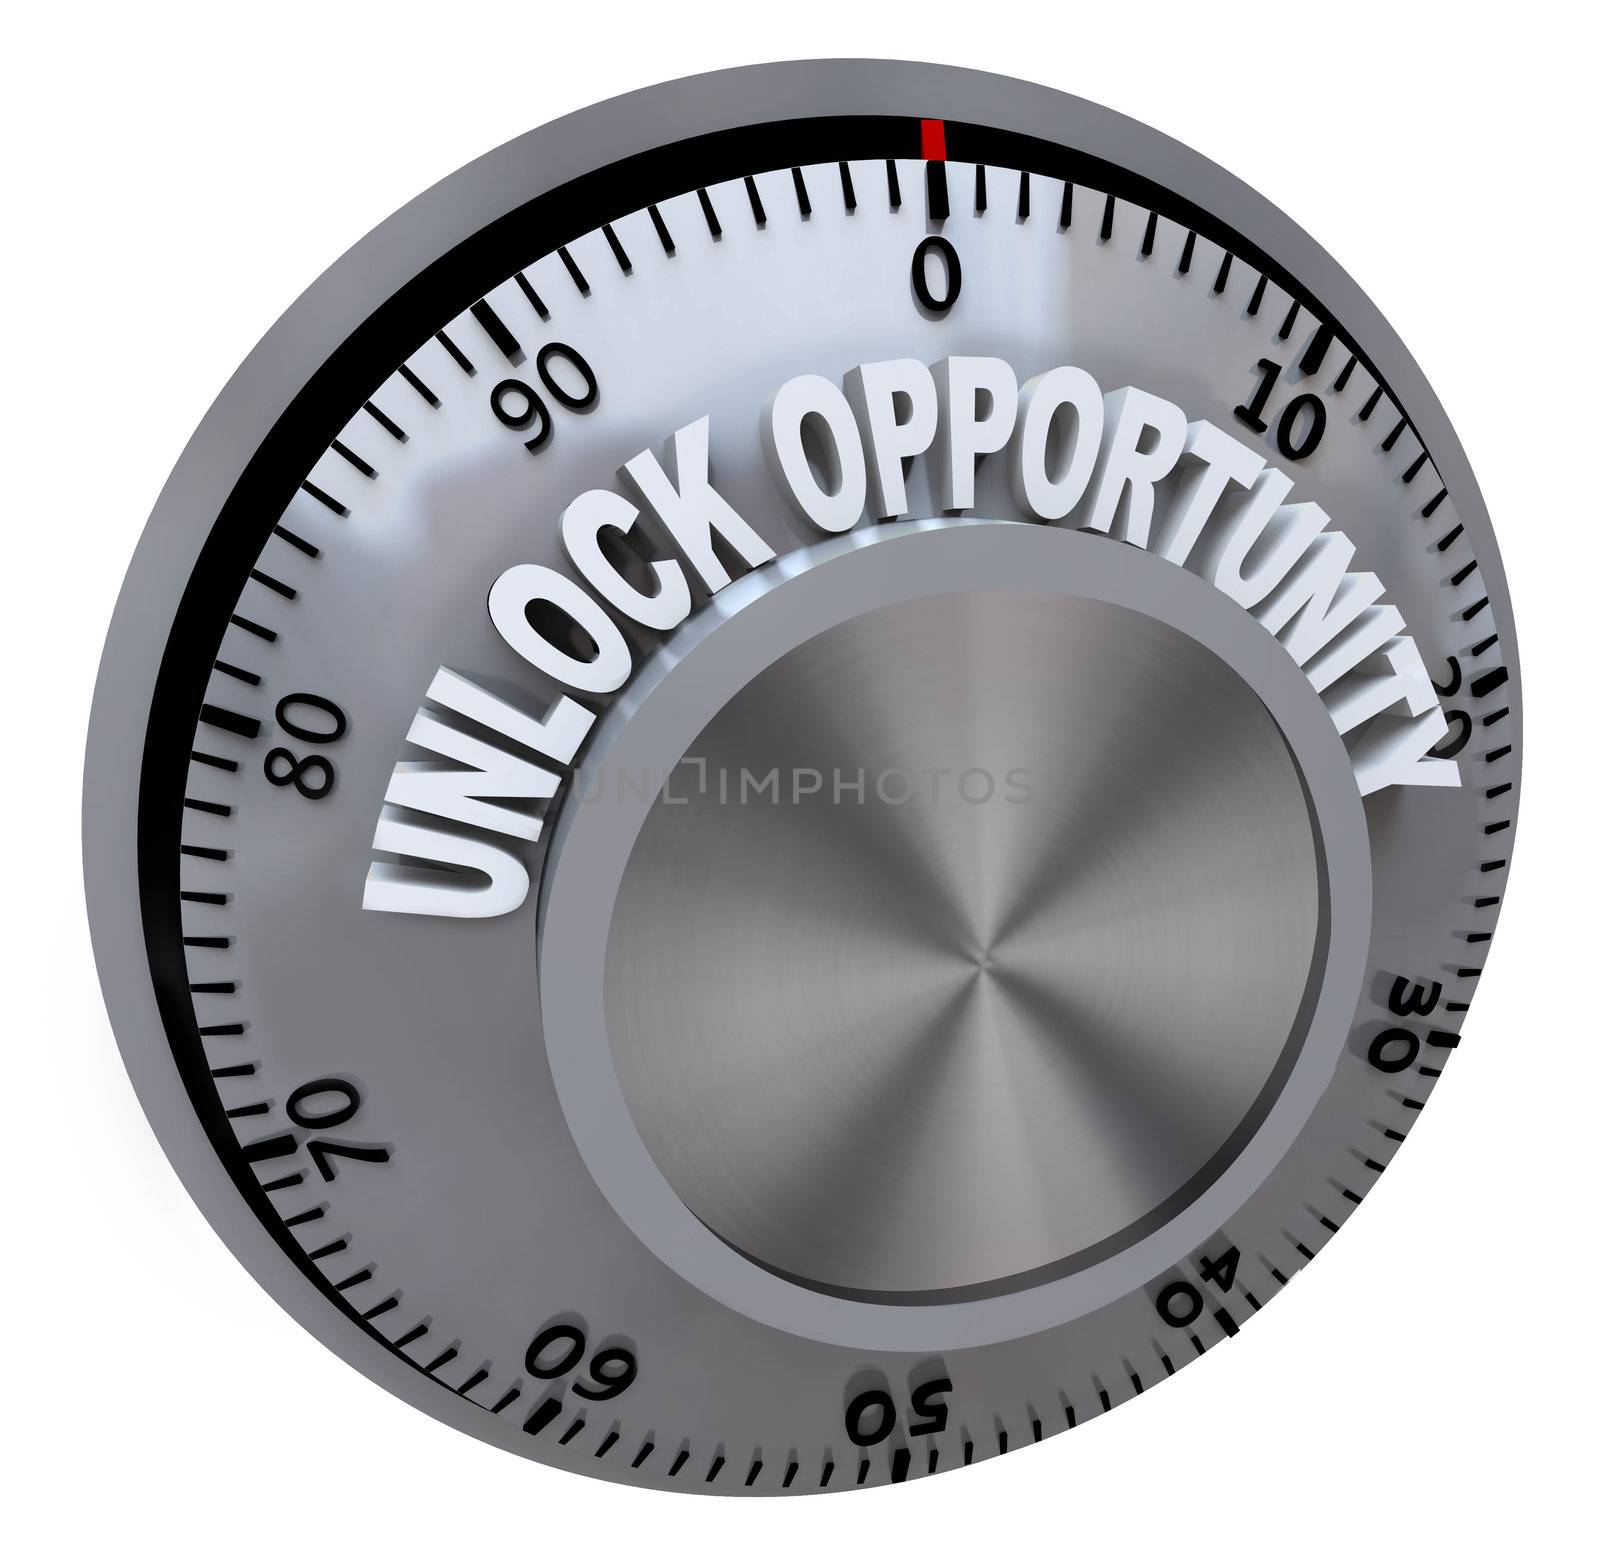 A safe lock dial with the words Unlock Opportunities telling you to enter the combination or secret code to open the door to new possibilities in your career, job or other apsects of life